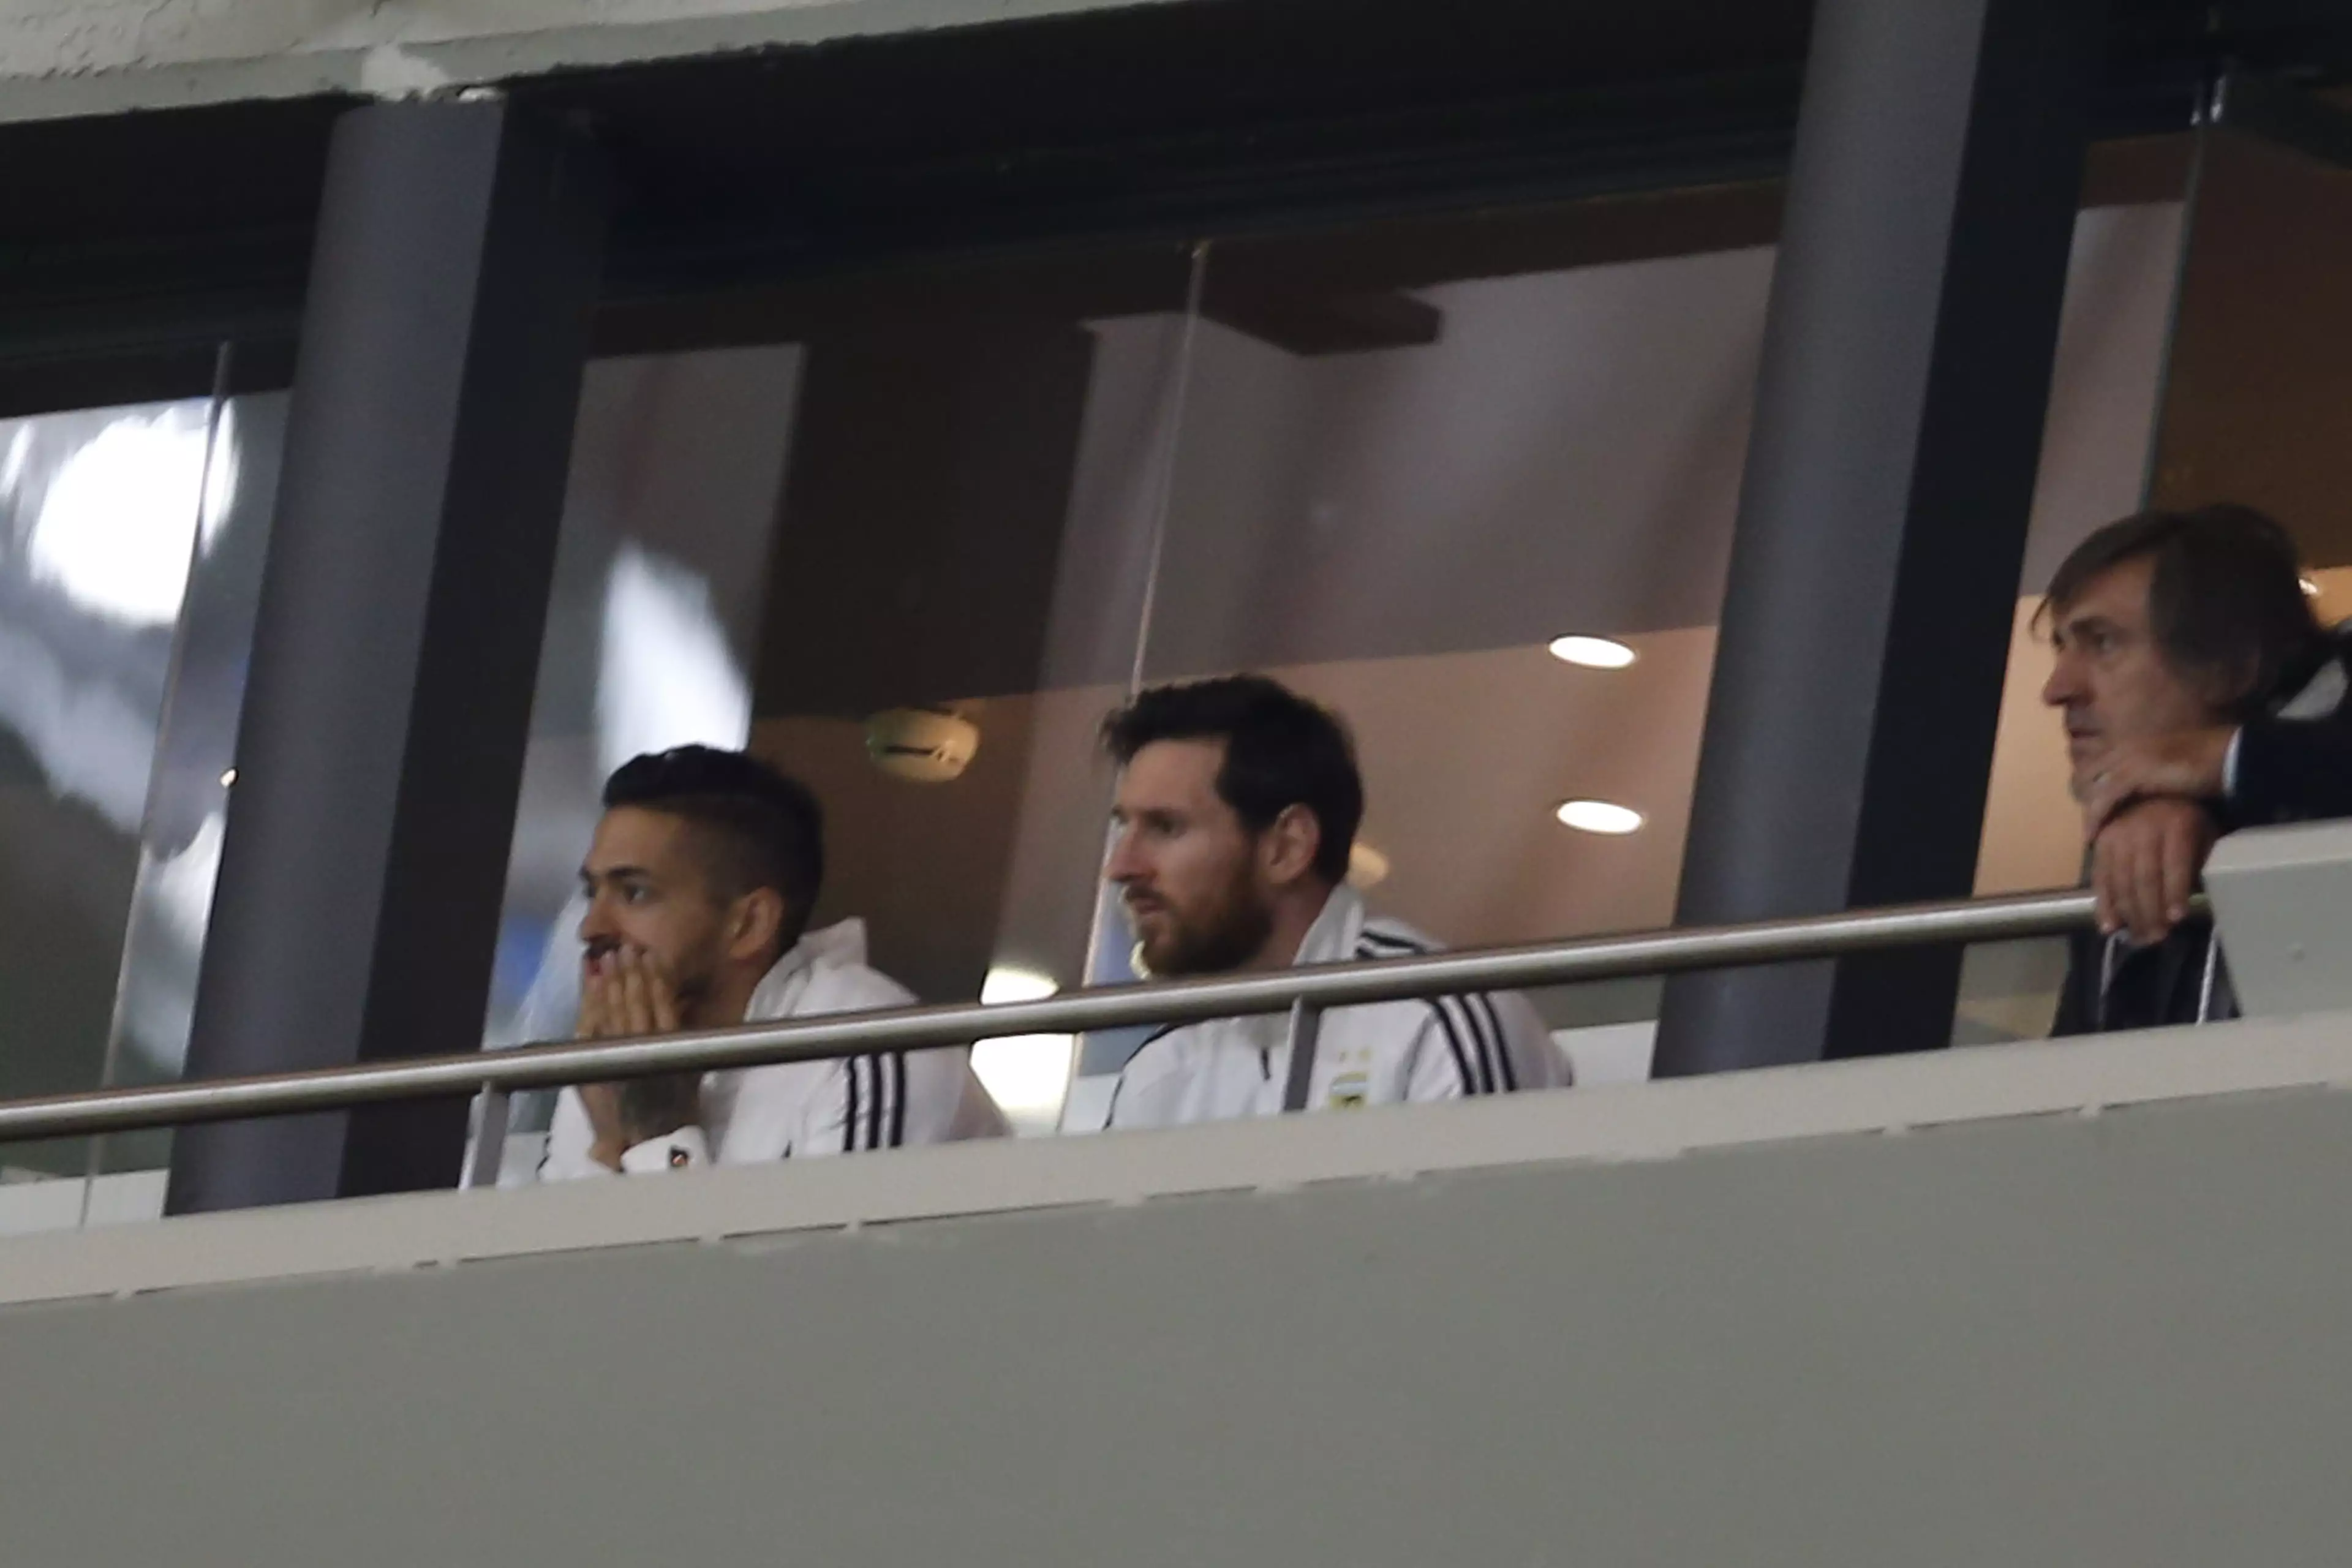 Messi watching on. Image: PA Images